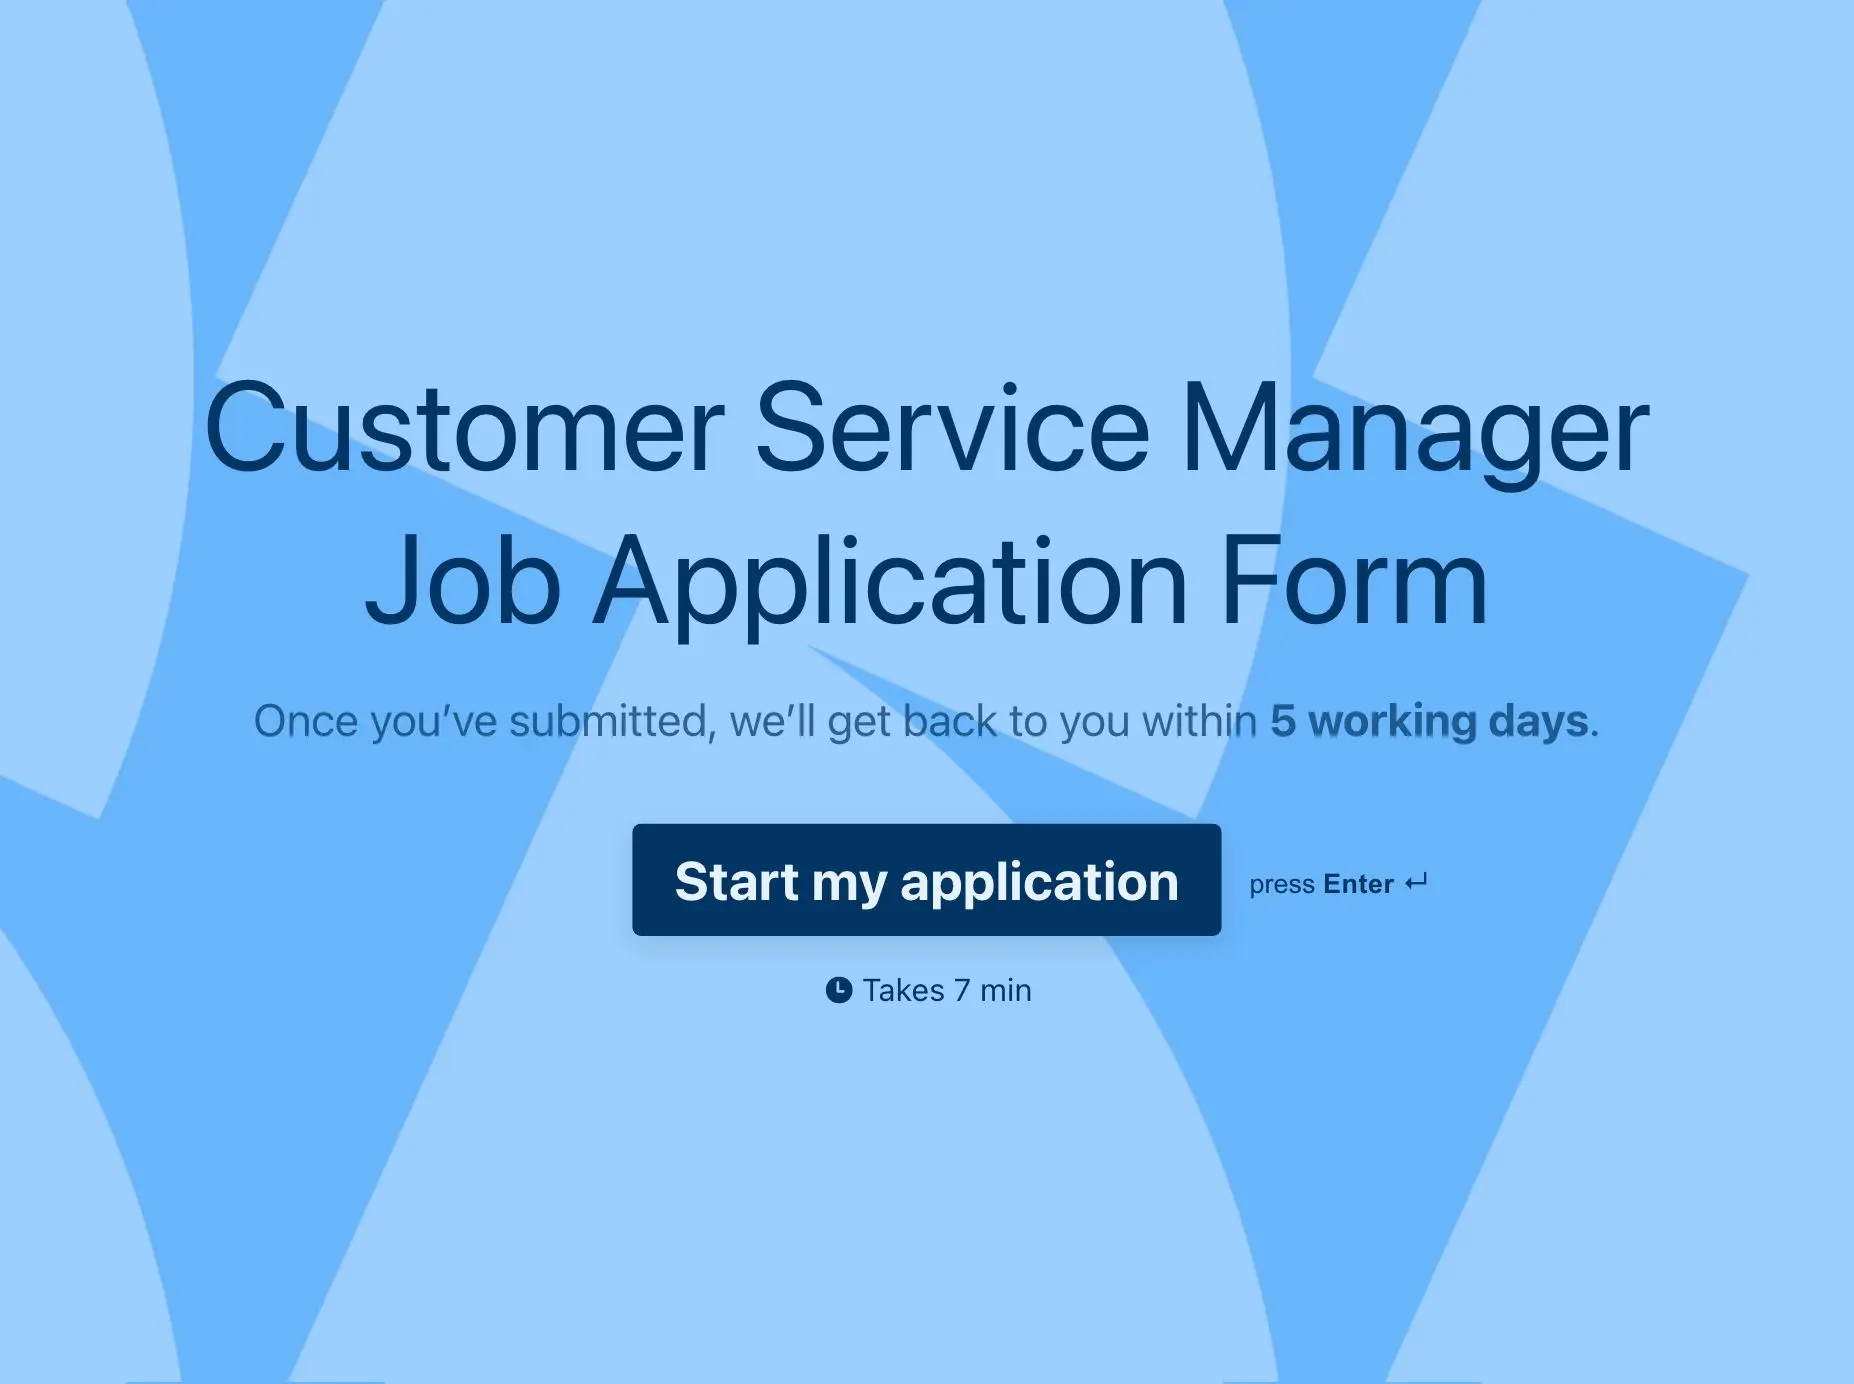 Customer Service Manager Job Application Form Template Hero